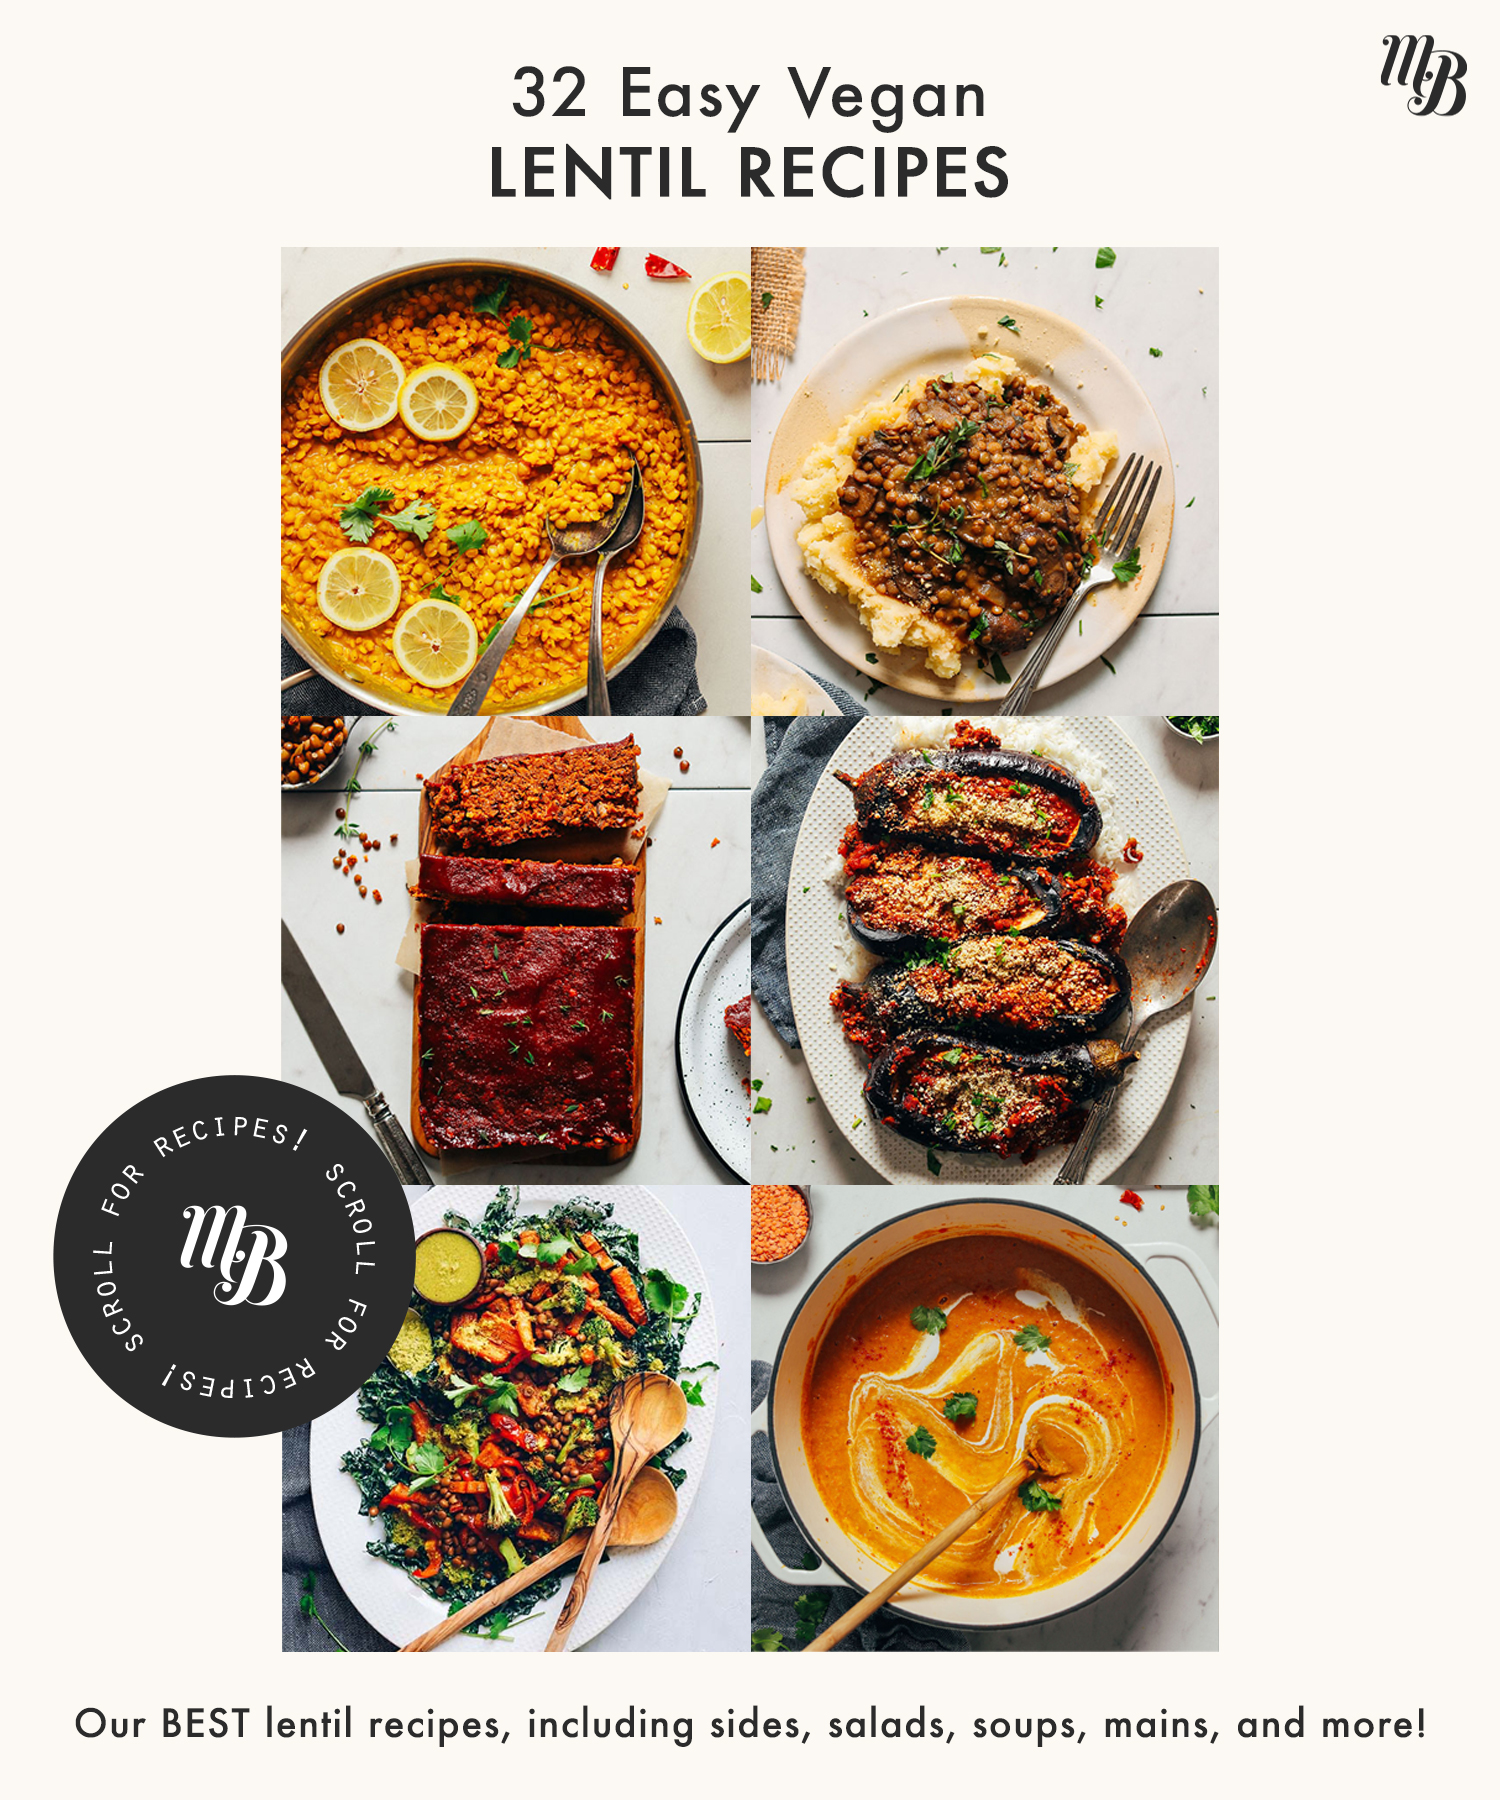 Assortment of recipes made with lentils